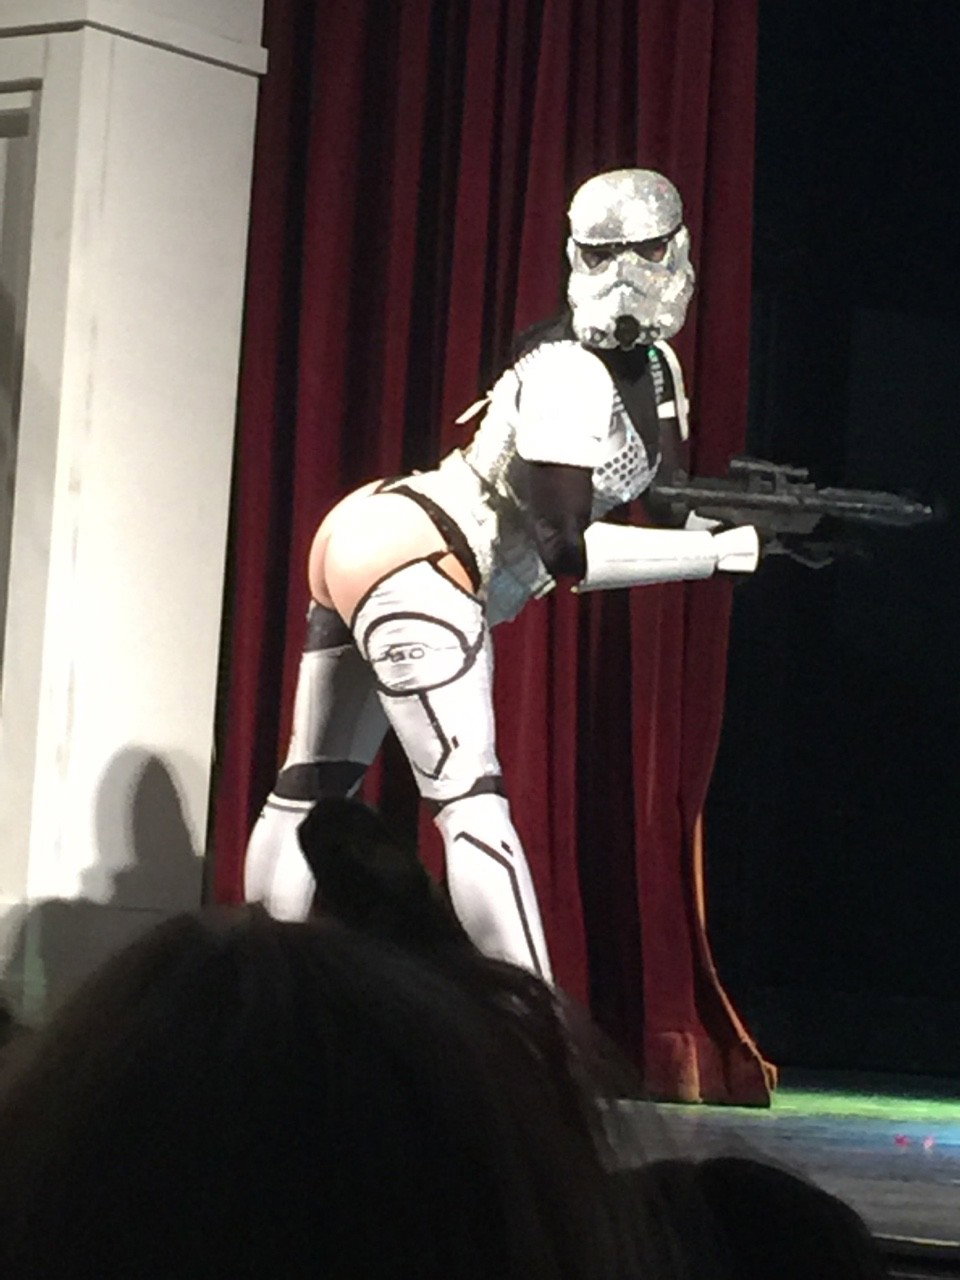 Photo by KonkeyDong80 with the username @KonkeyDong80,  June 6, 2016 at 12:09 AM and the text says 'tiny-bandaid:

Storm trooper
 #girl  #woman  #storm  #trooper  #ass  #bum  #butt  #hot  #sexy  #gif  #animated  #dance  #nerdgirl  #burlesque  #star  #wars'